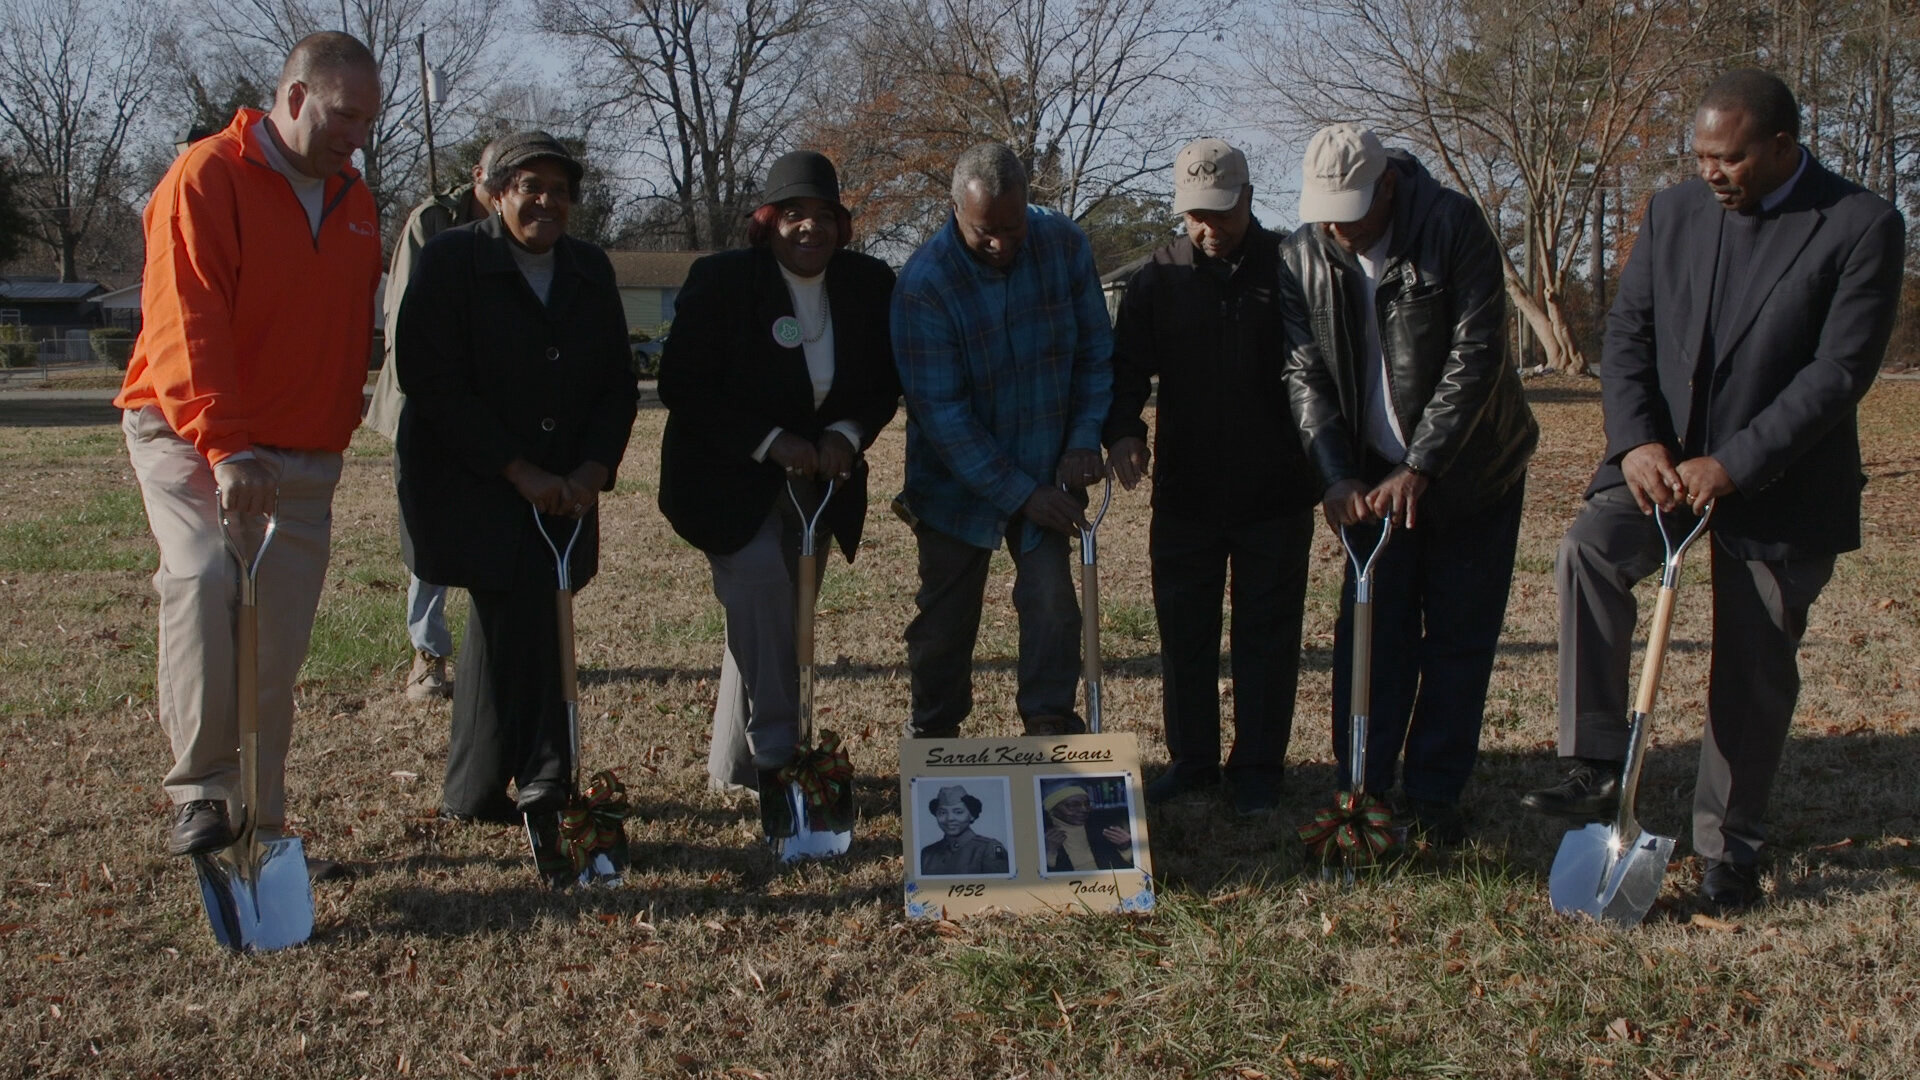  The SKE Project Team breaks ground at Dr. Martin Luther King Jr. Park.  Photo courtesy of Morgan Potts  